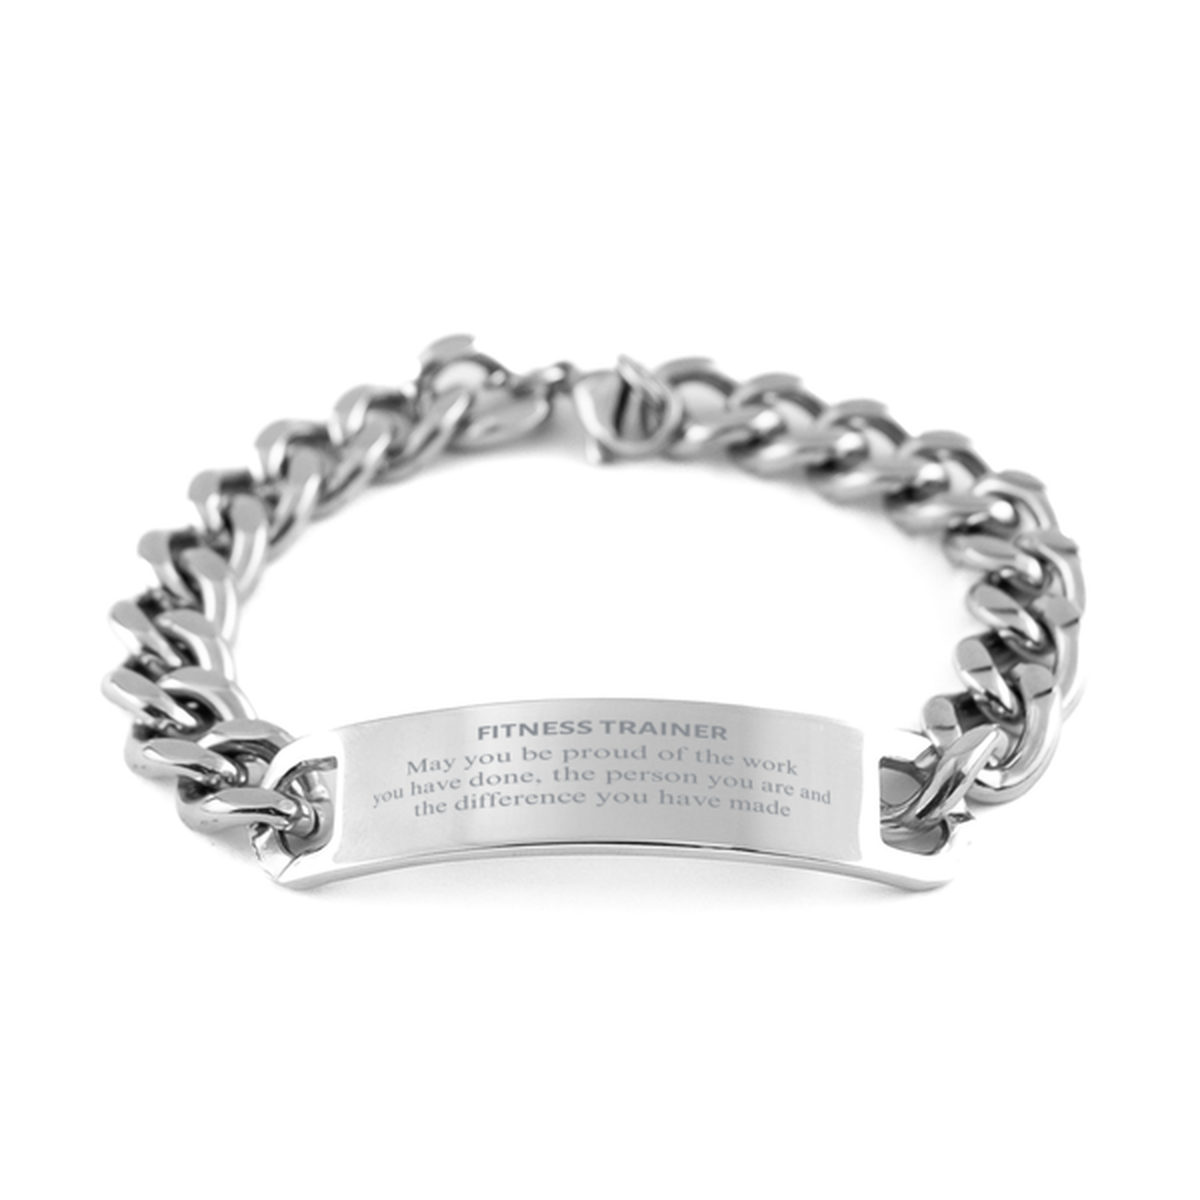 Fitness Trainer May you be proud of the work you have done, Retirement Fitness Trainer Cuban Chain Stainless Steel Bracelet for Colleague Appreciation Gifts Amazing for Fitness Trainer